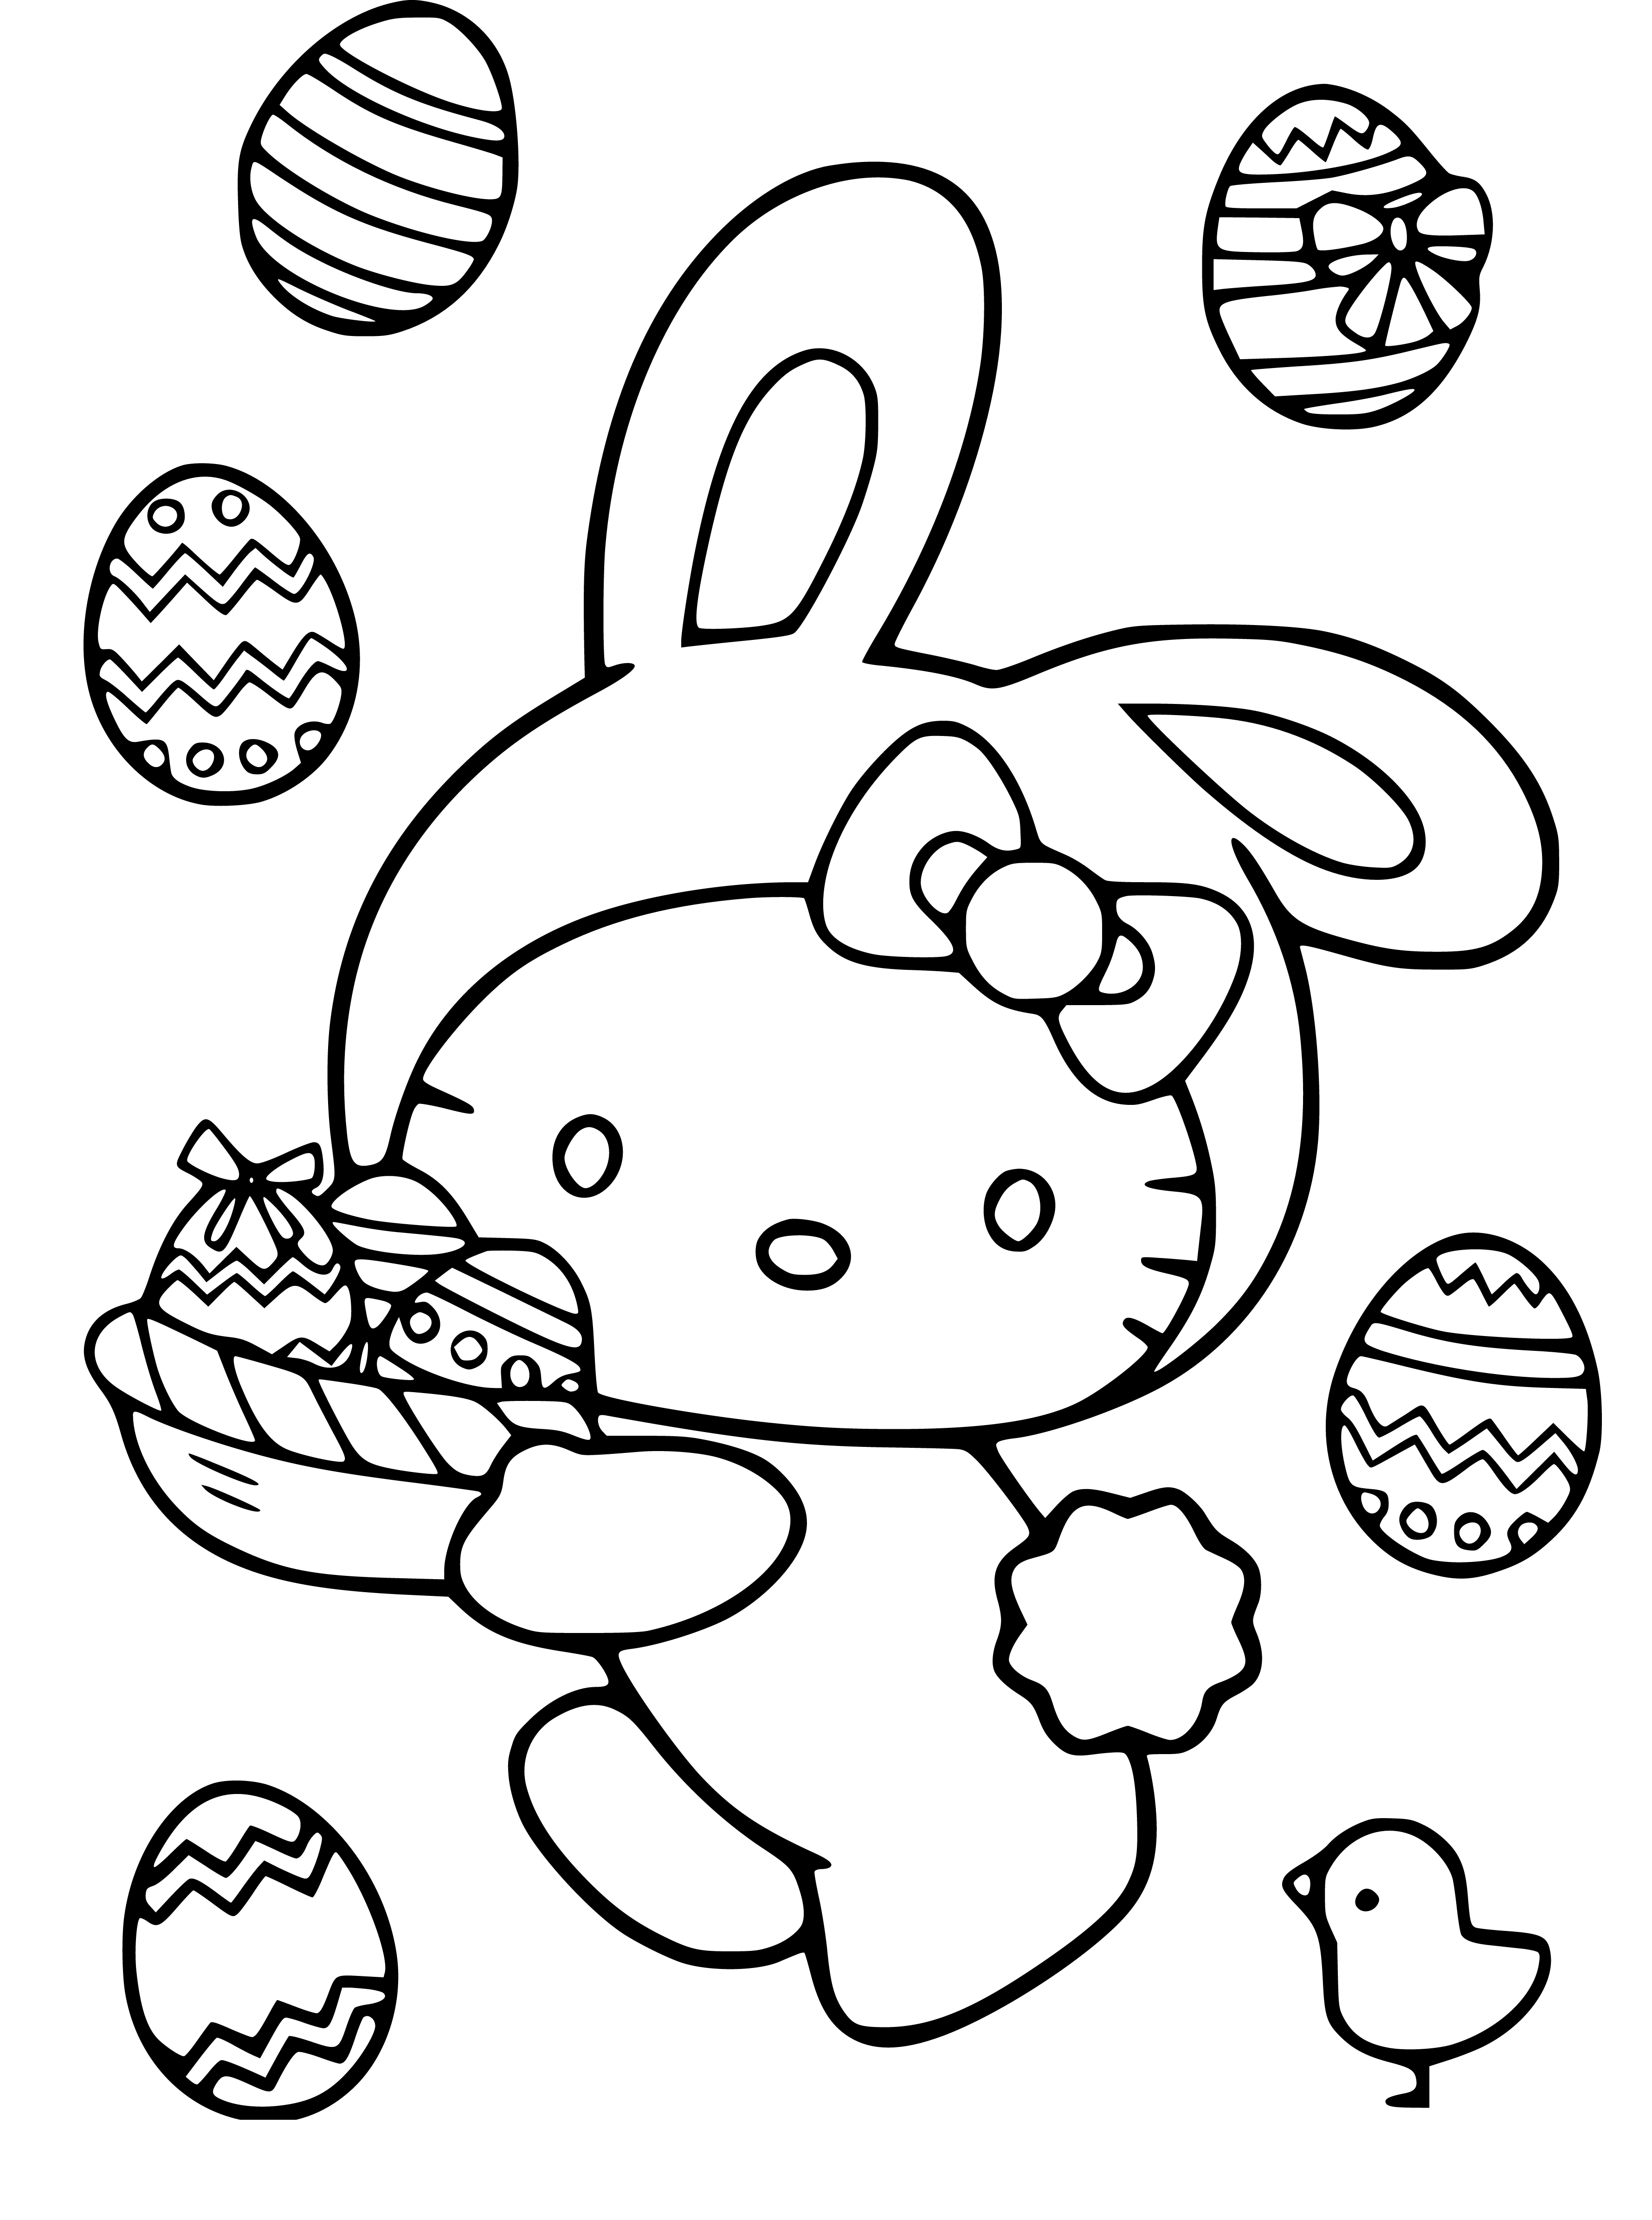 Printable Kitty Easter eggs Coloring Page for kids.